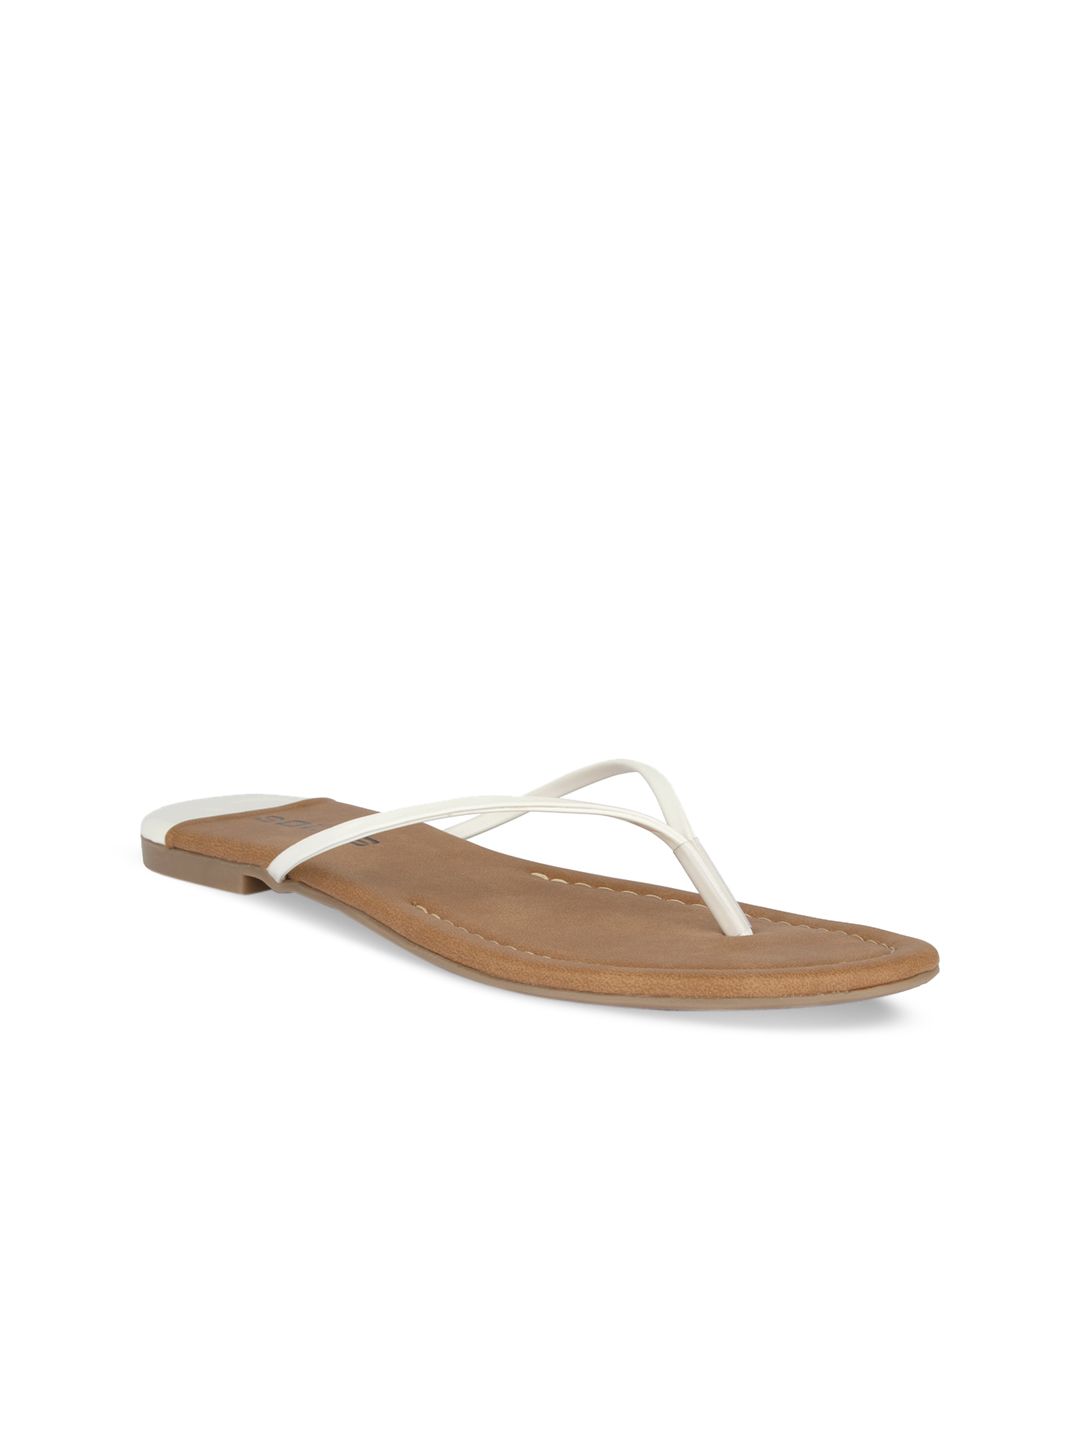 SOLES Women White T-Strap Flats Price in India